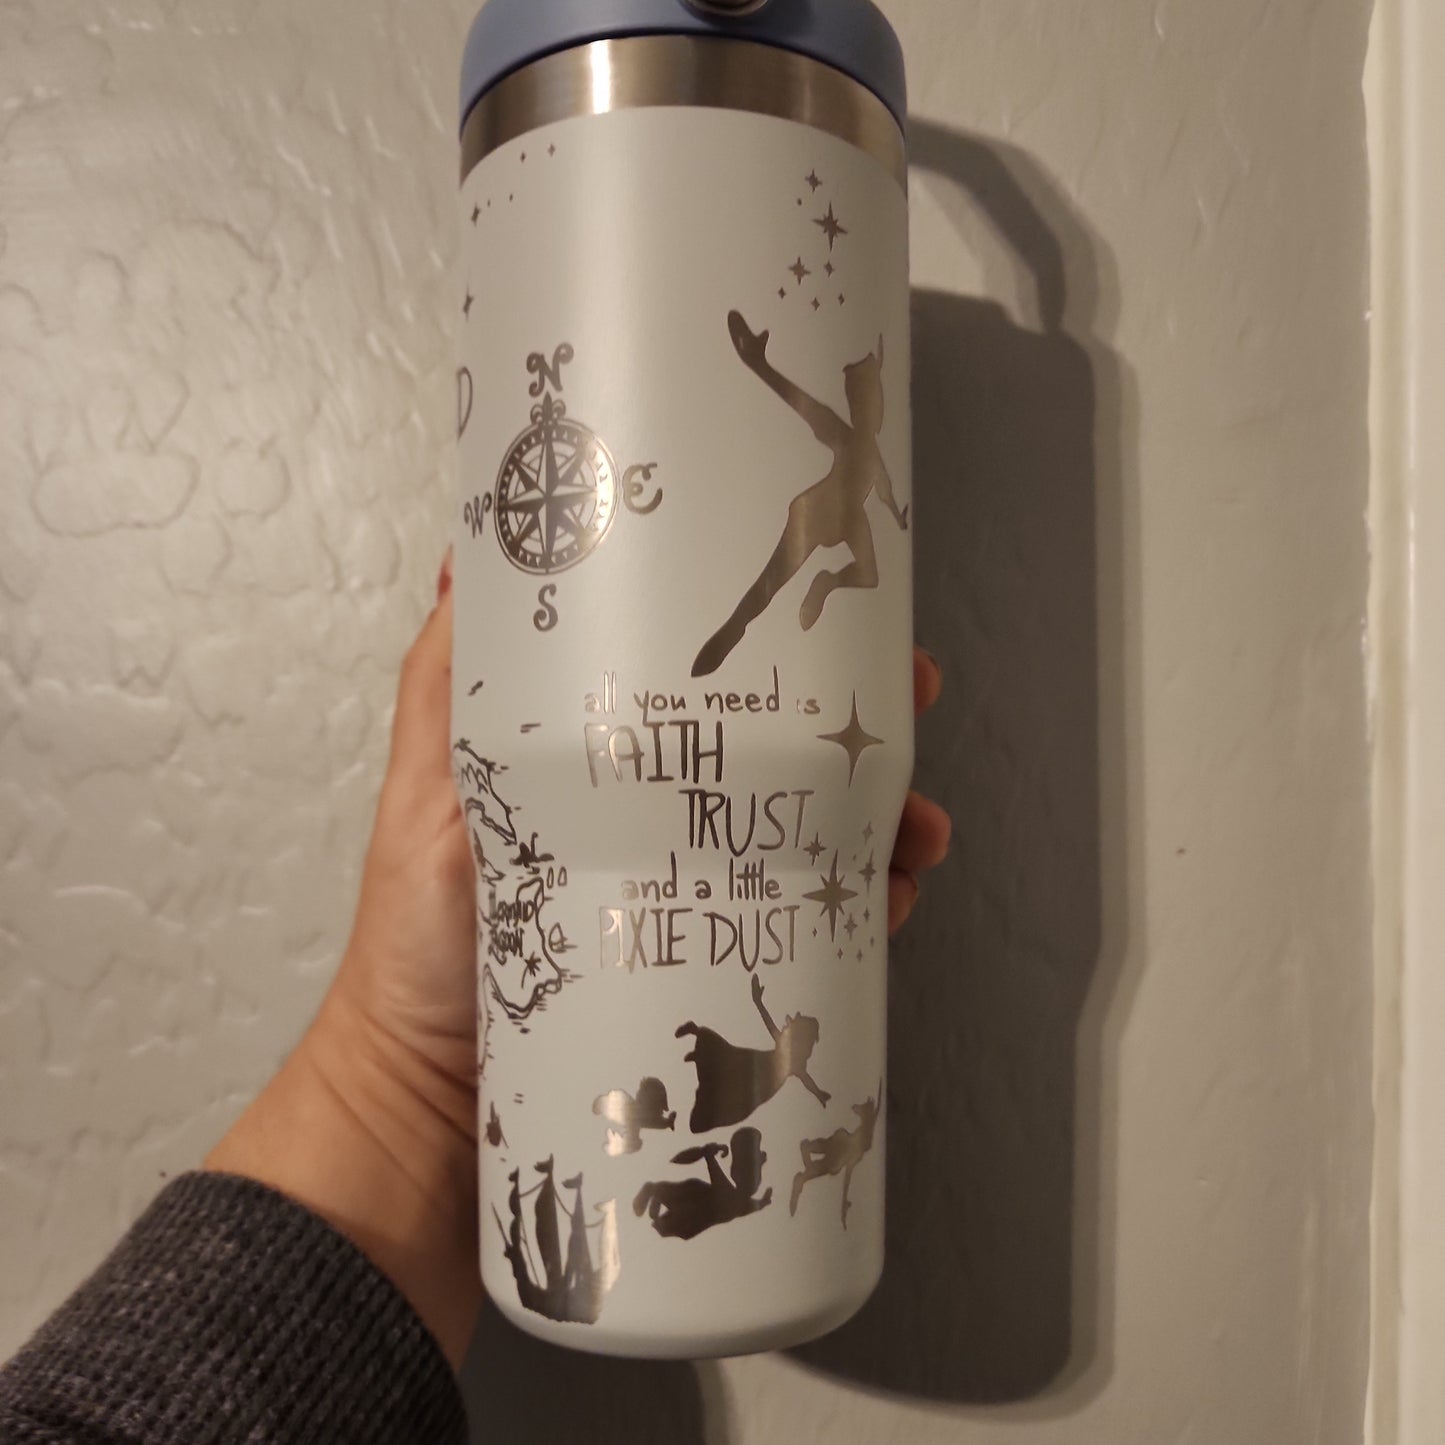 30 Oz Ice flow Stanley Engraved Neverland